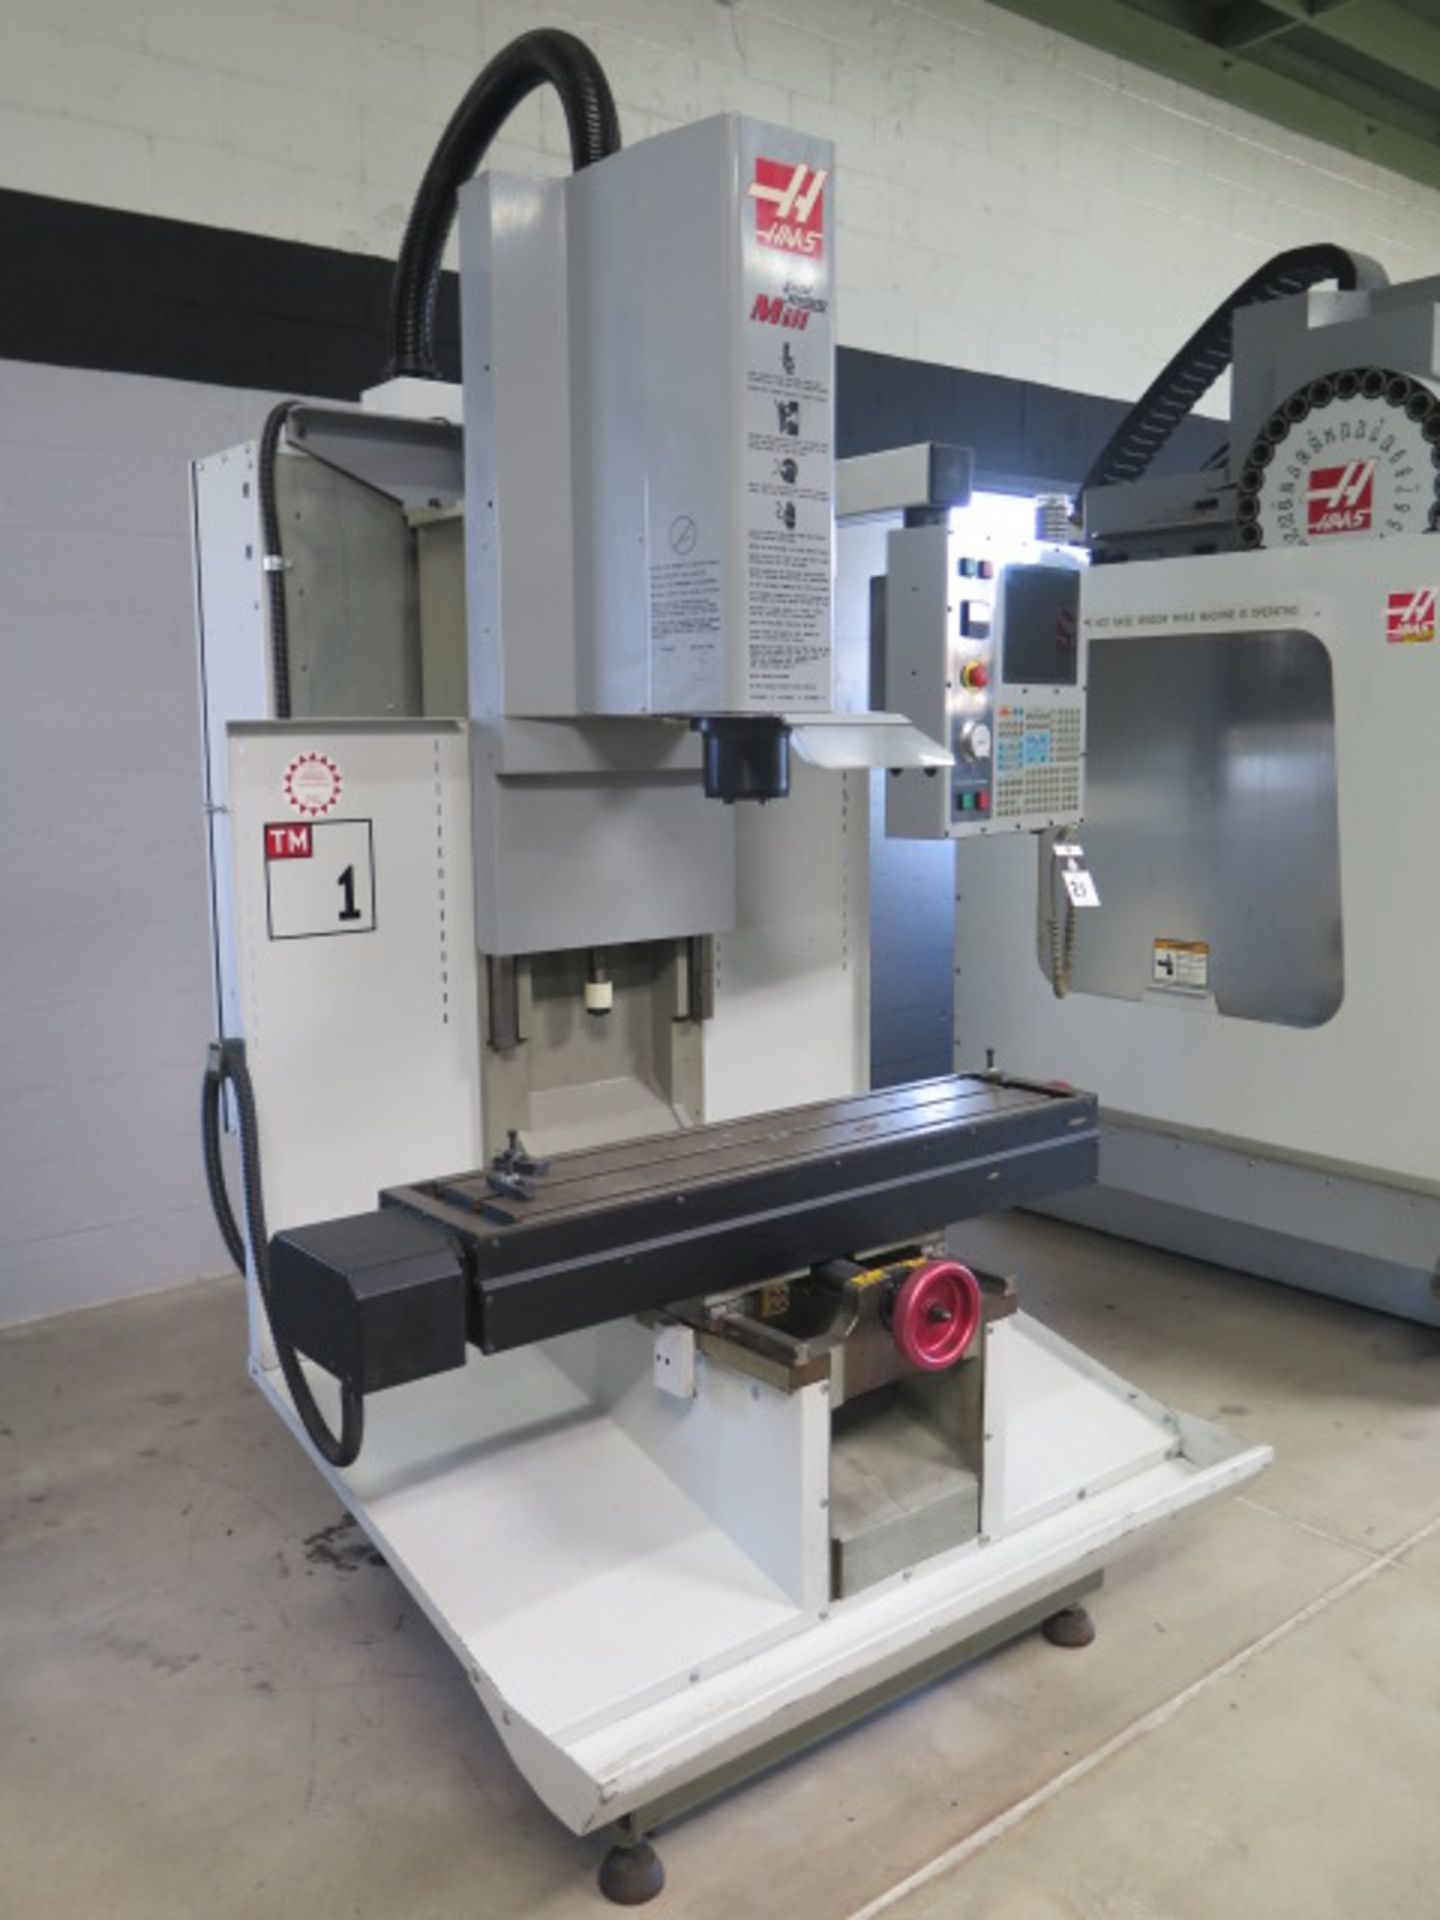 2002 Haas TM-1 CNC Tool Room Mill s/n 29002 w/ 40-Taper Spindle, 10 ½” x 48” Table, Sold AS IS - Image 2 of 15